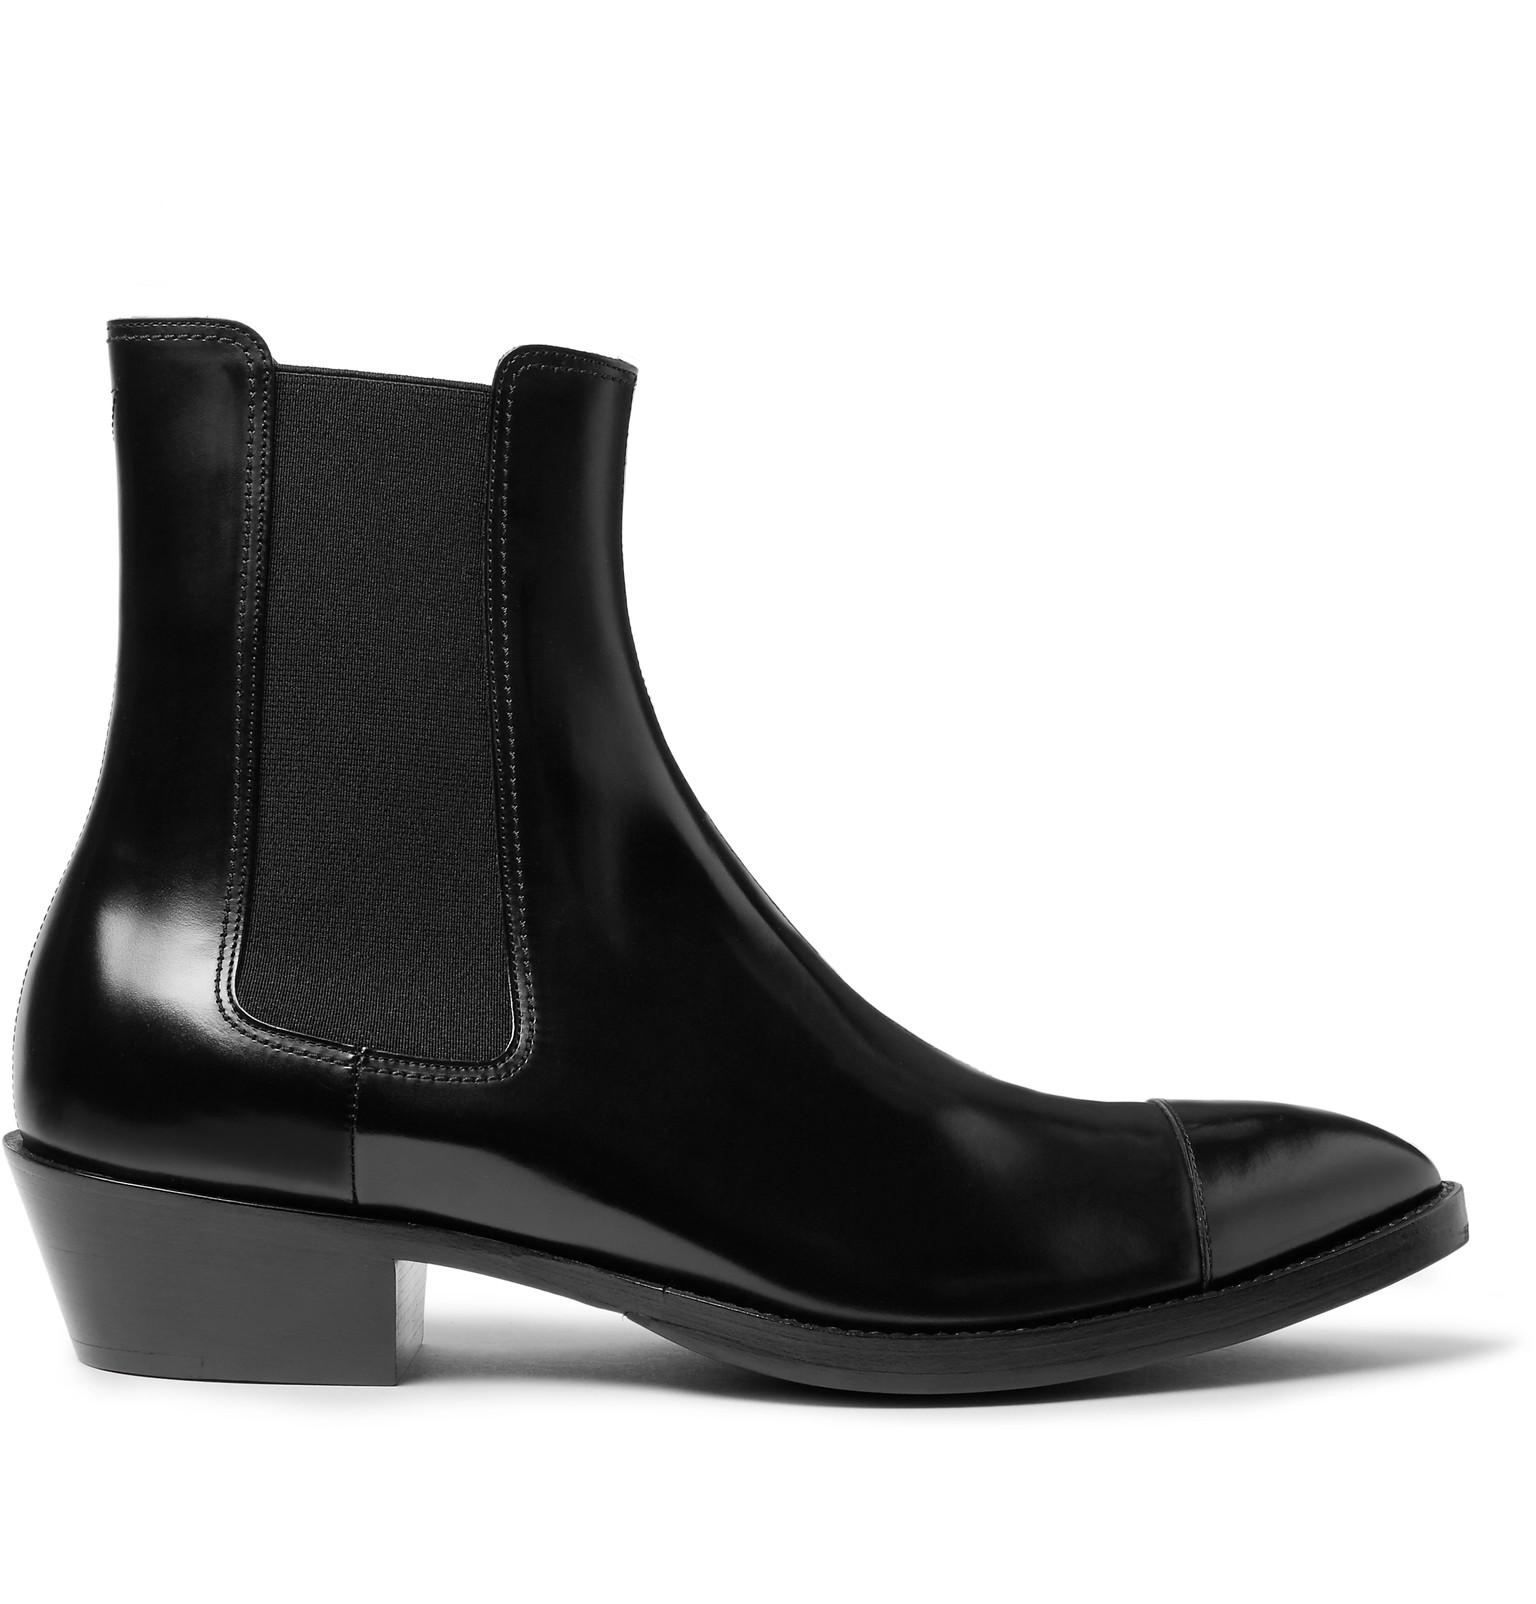 Berluti Heith Austin Glossed-leather Chelsea Boots in Black for Men - Lyst